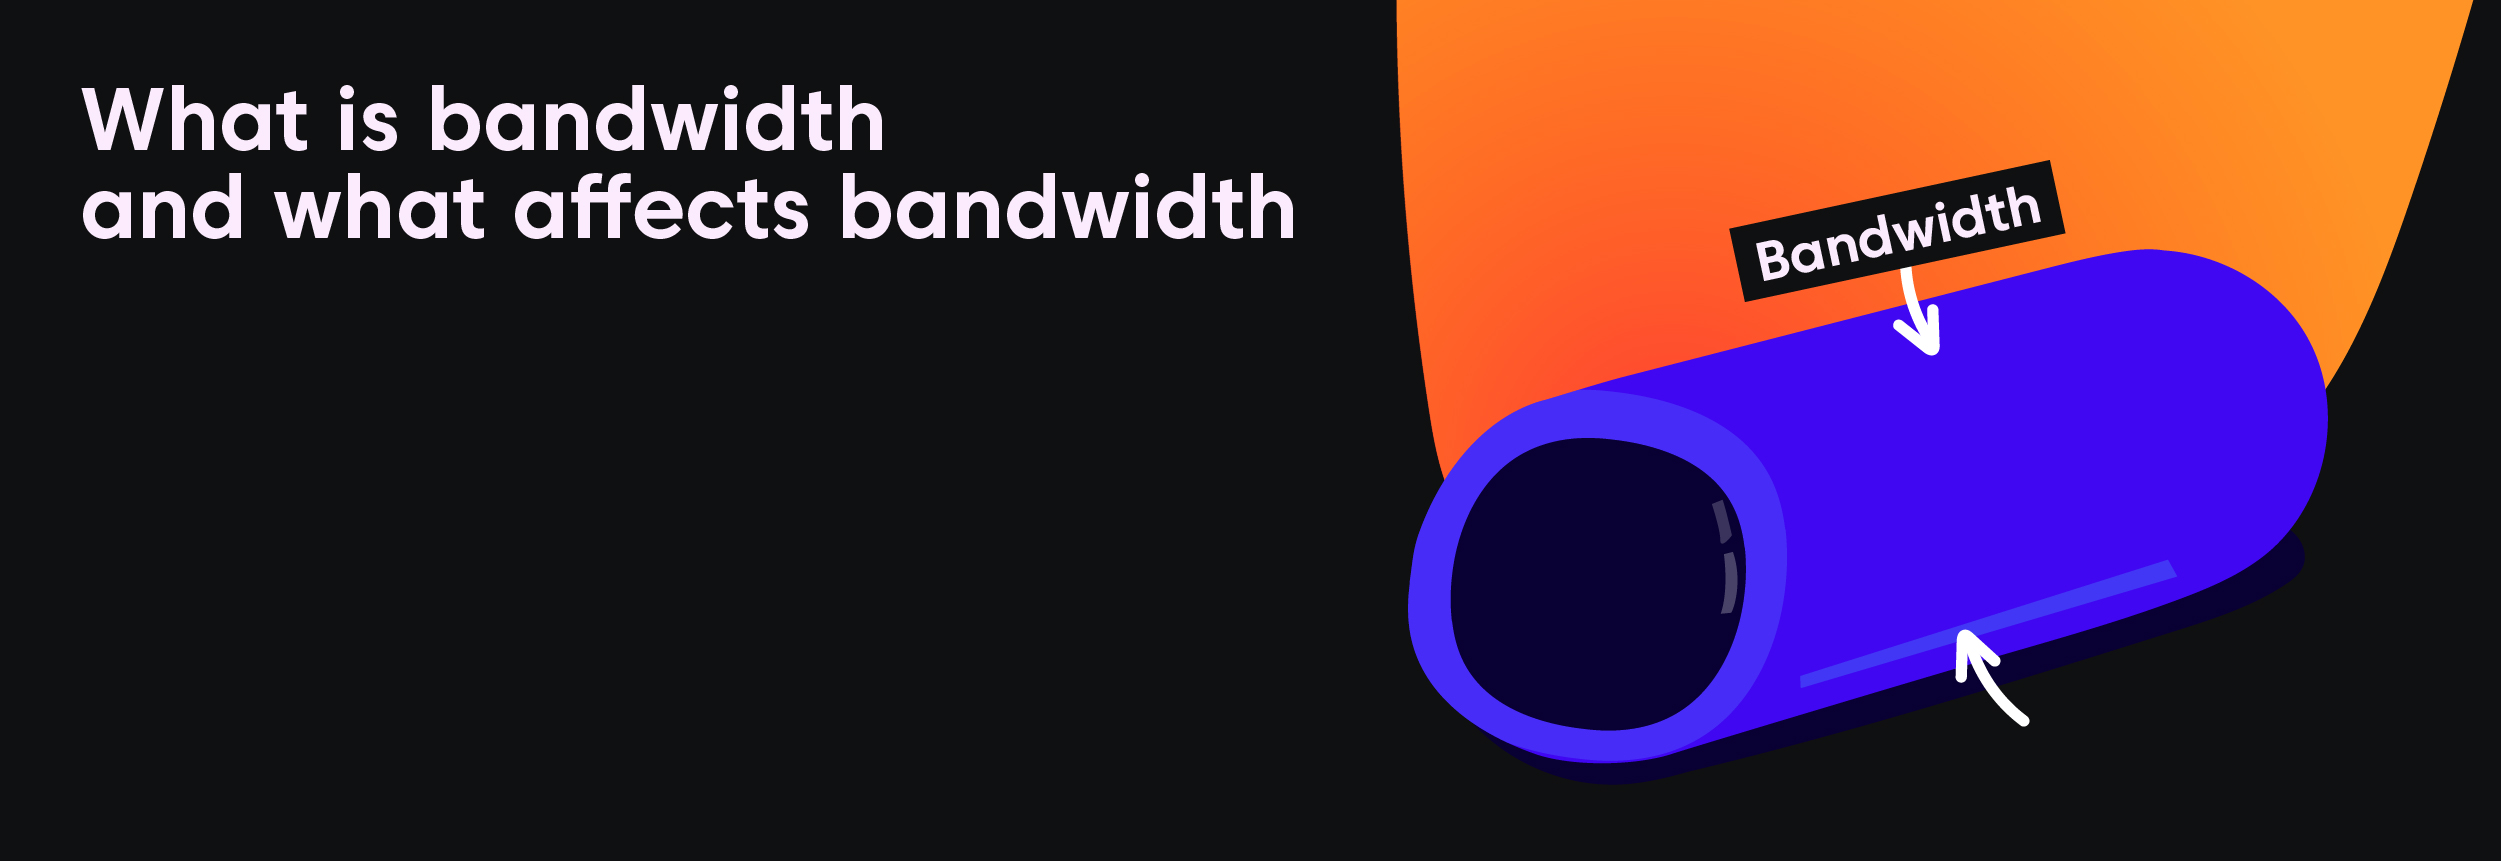 What Is Bandwidth and What Affects Bandwidth